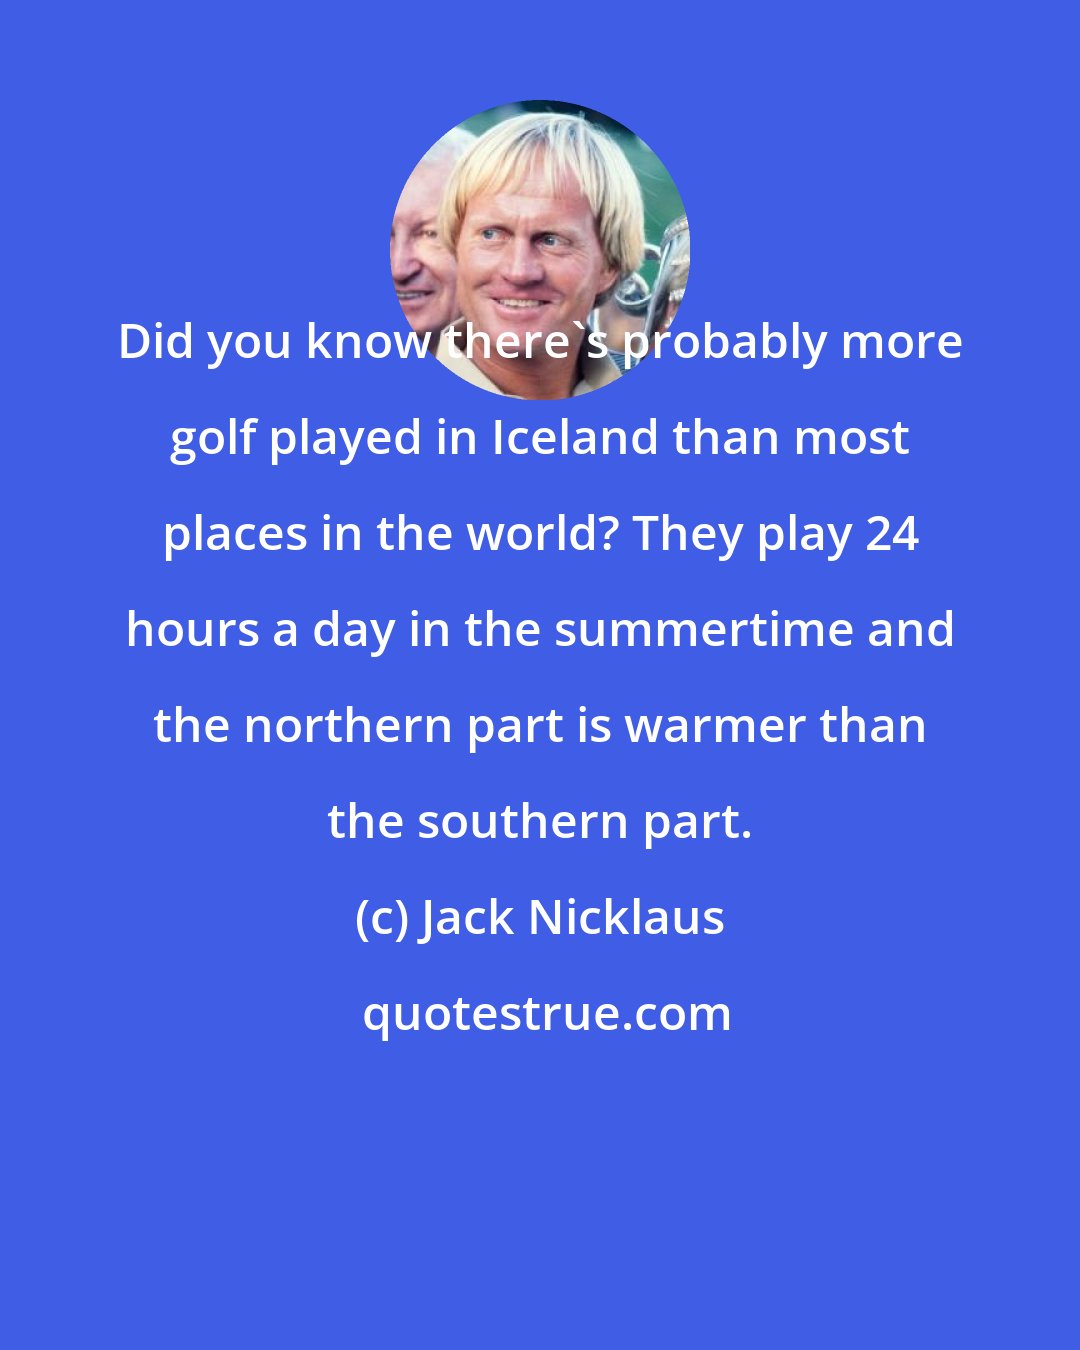 Jack Nicklaus: Did you know there's probably more golf played in Iceland than most places in the world? They play 24 hours a day in the summertime and the northern part is warmer than the southern part.